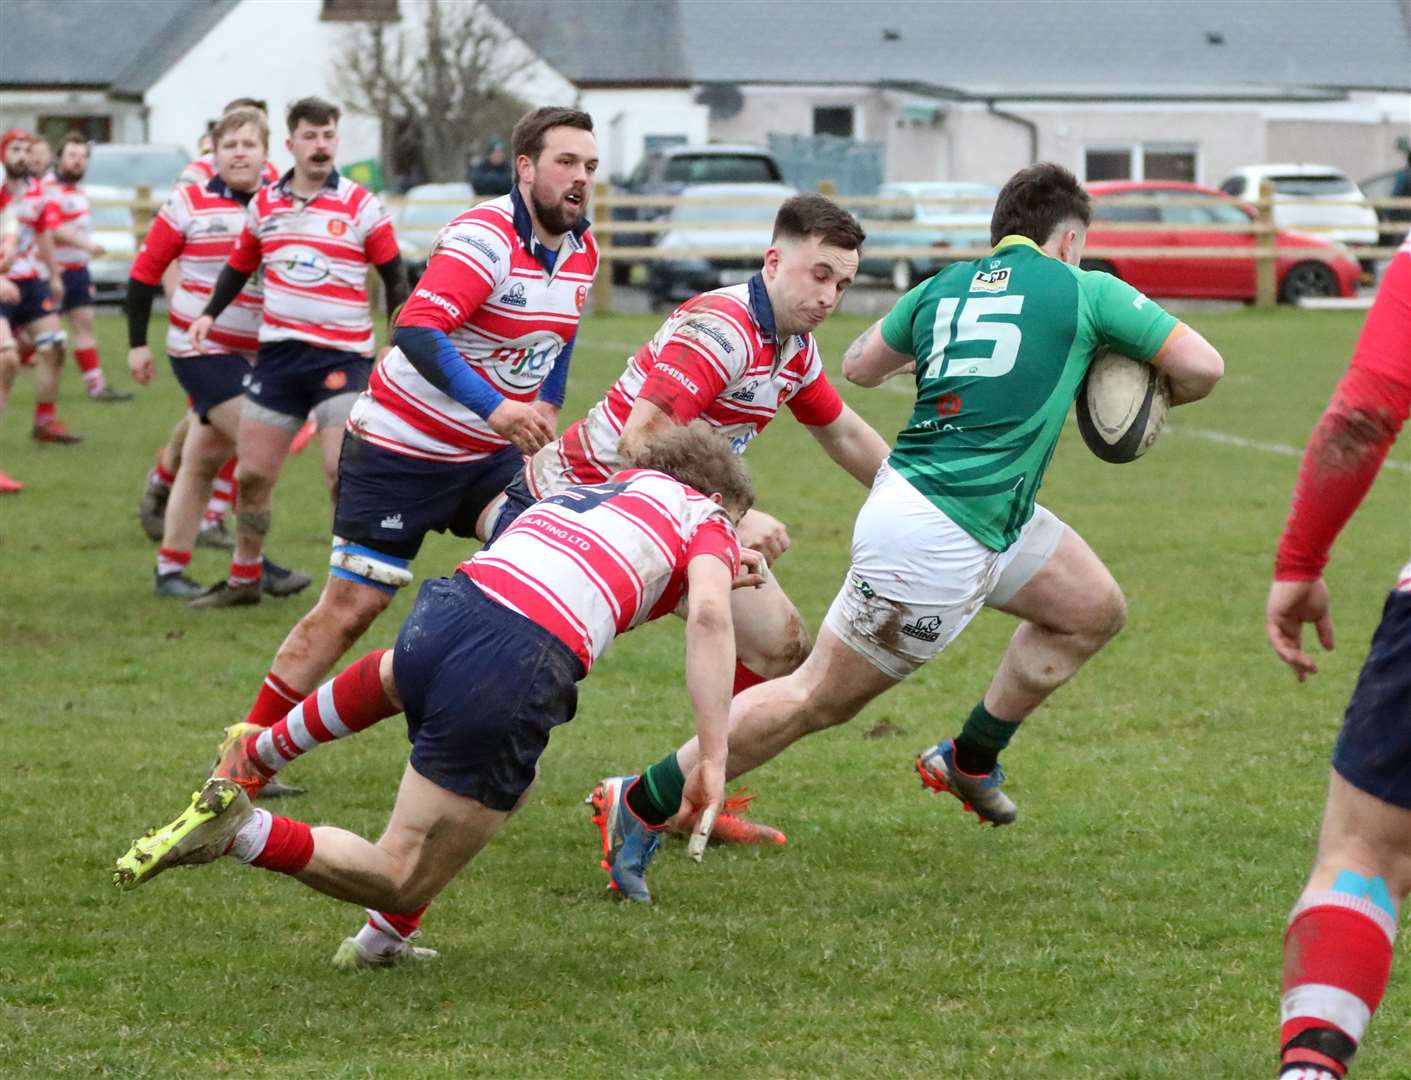 Cameron Ryder evades two tackles to break free and score a late try for Caithness. Picture: James Gunn